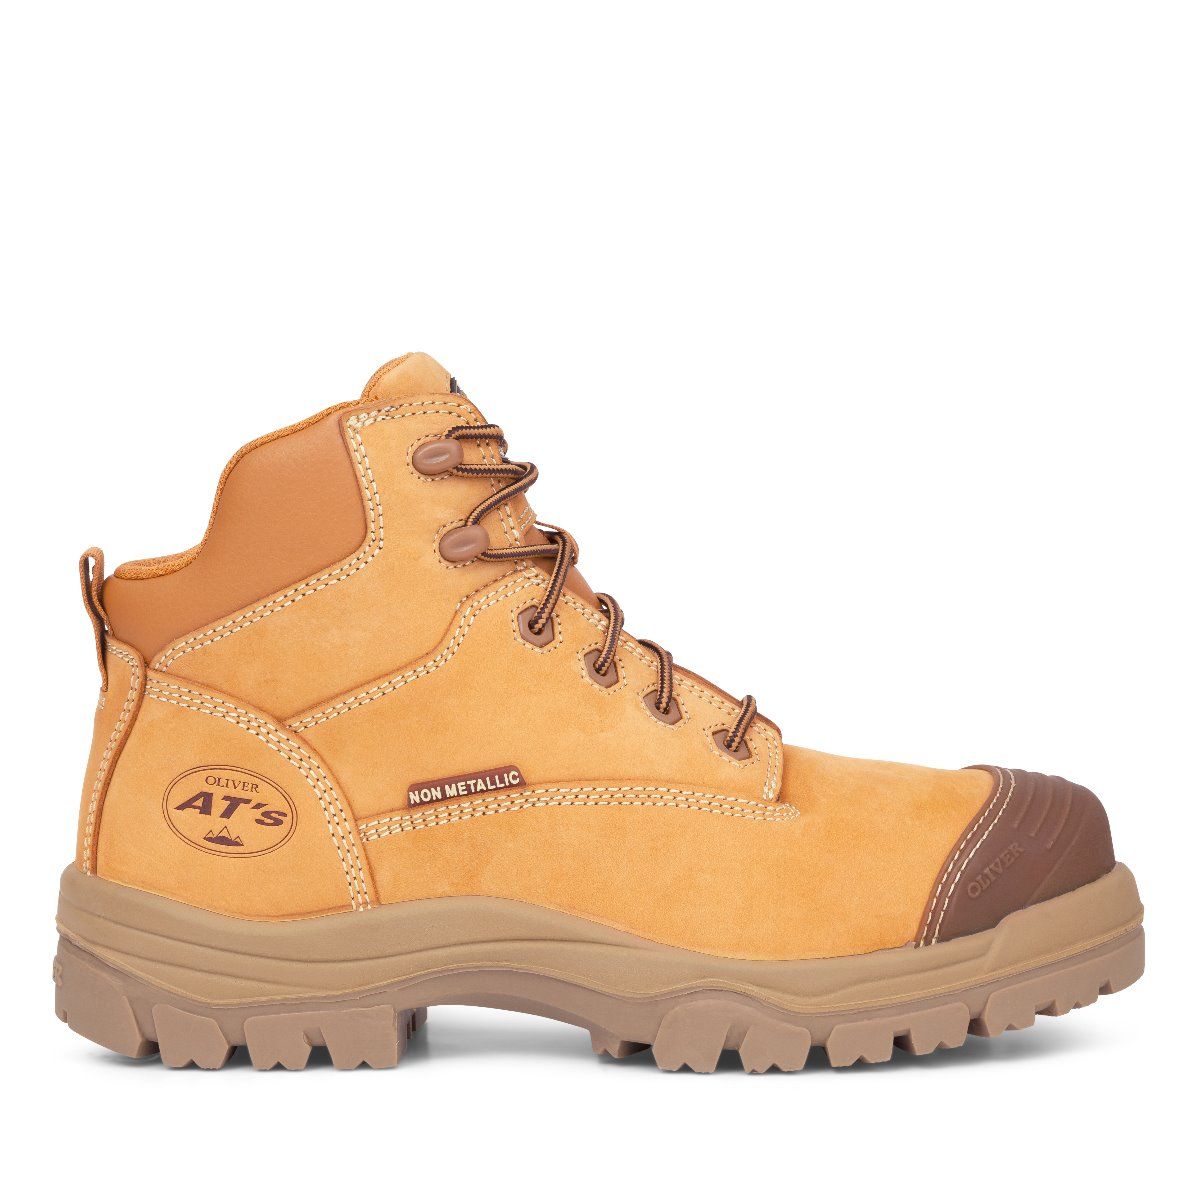 Oliver Mens 45-630Z 130mm Zip at Boots Comp tpu Wheat 10